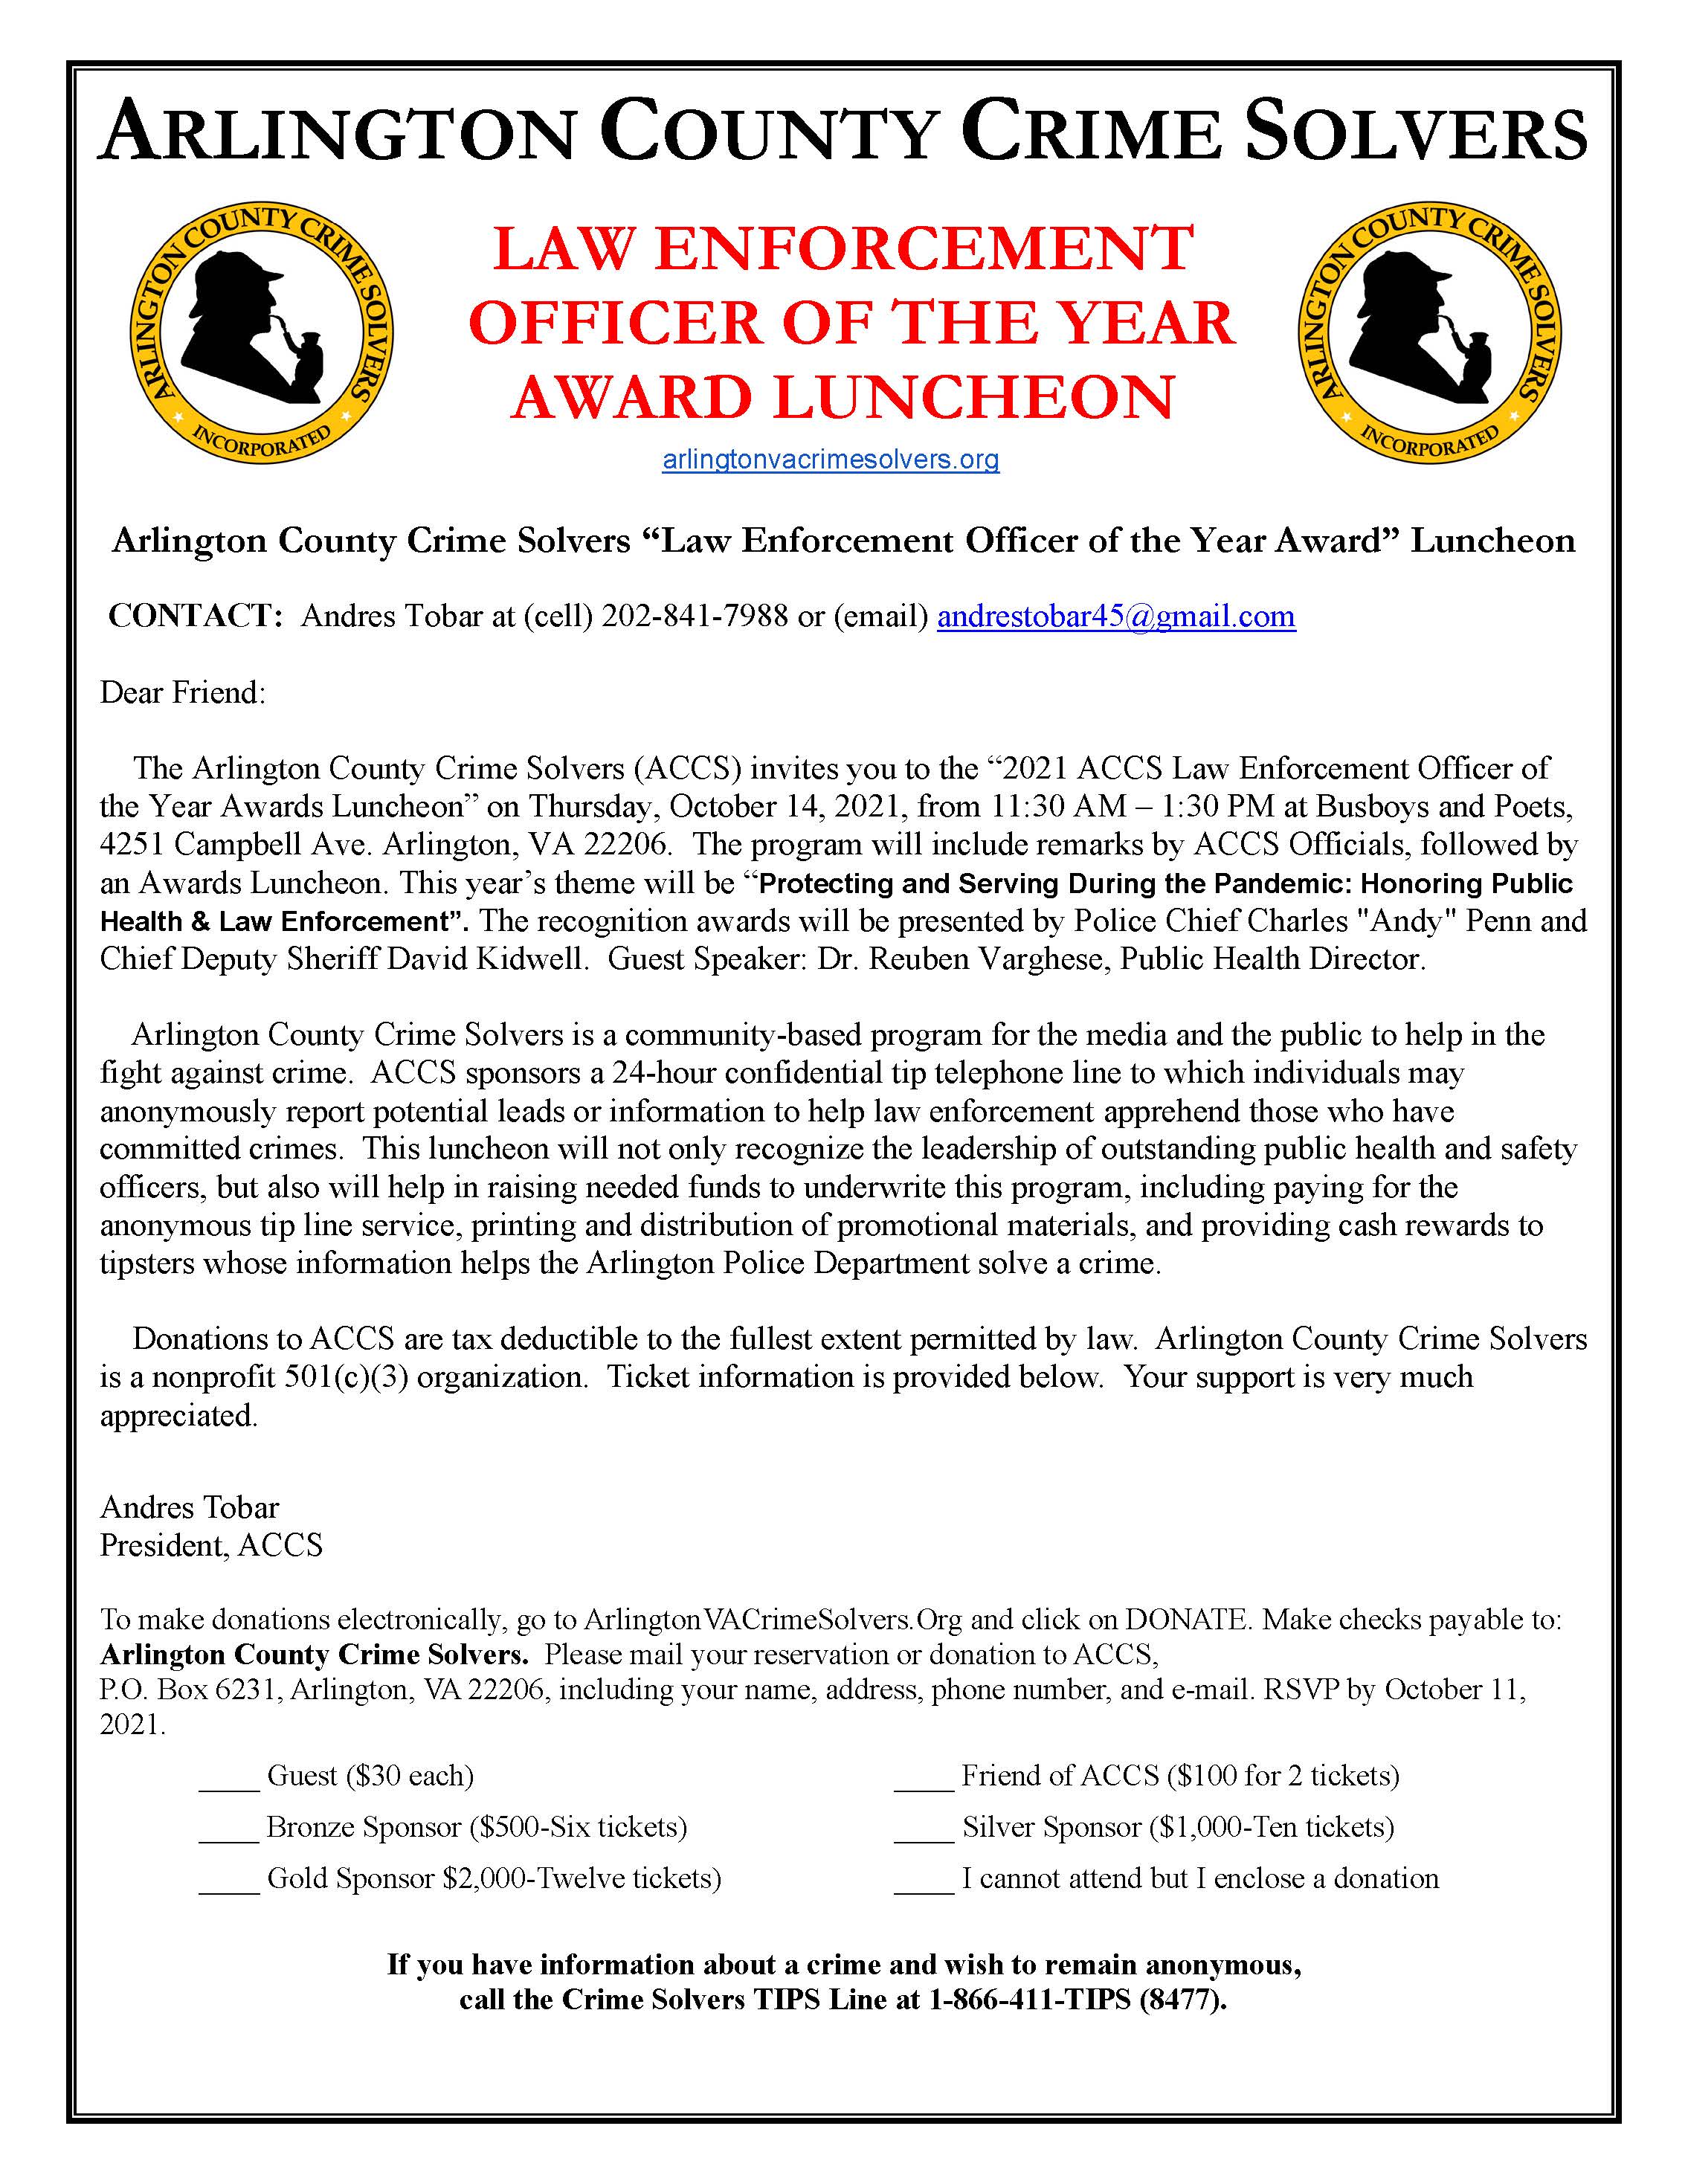 Law Enforcement Officer of the Year Award Luncheon - October 14, 2021